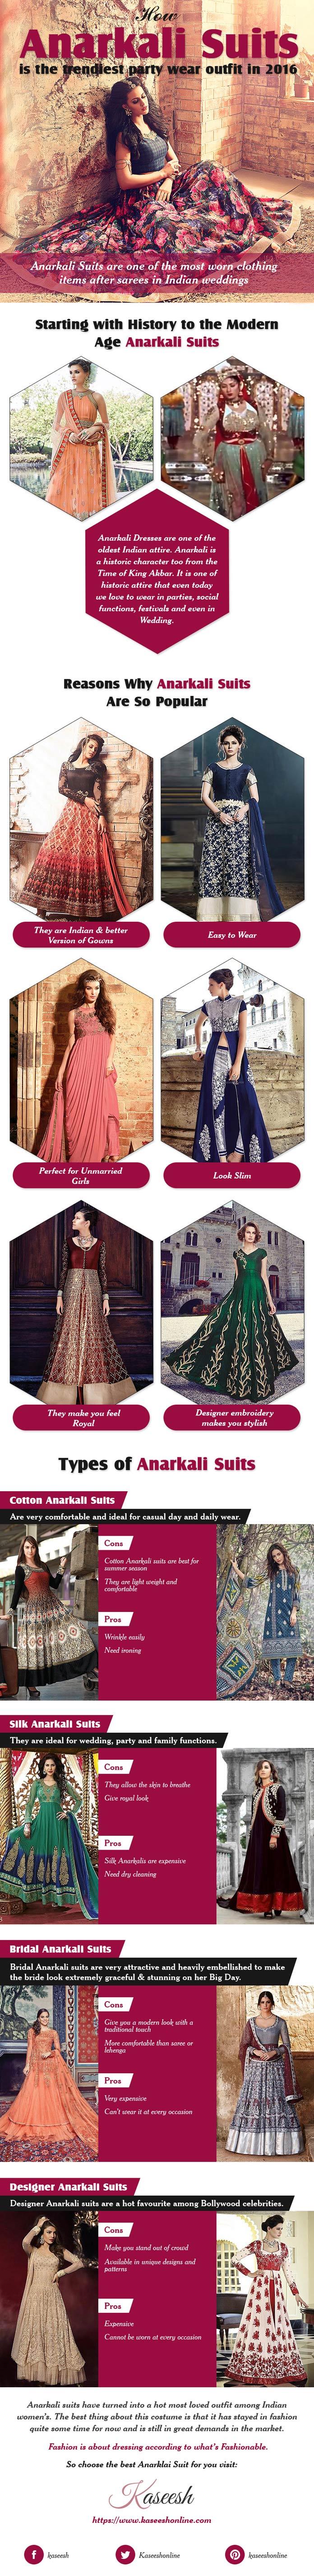 Anarkali-suits-is-the-trendiest-party-wear-outfit-in-2016